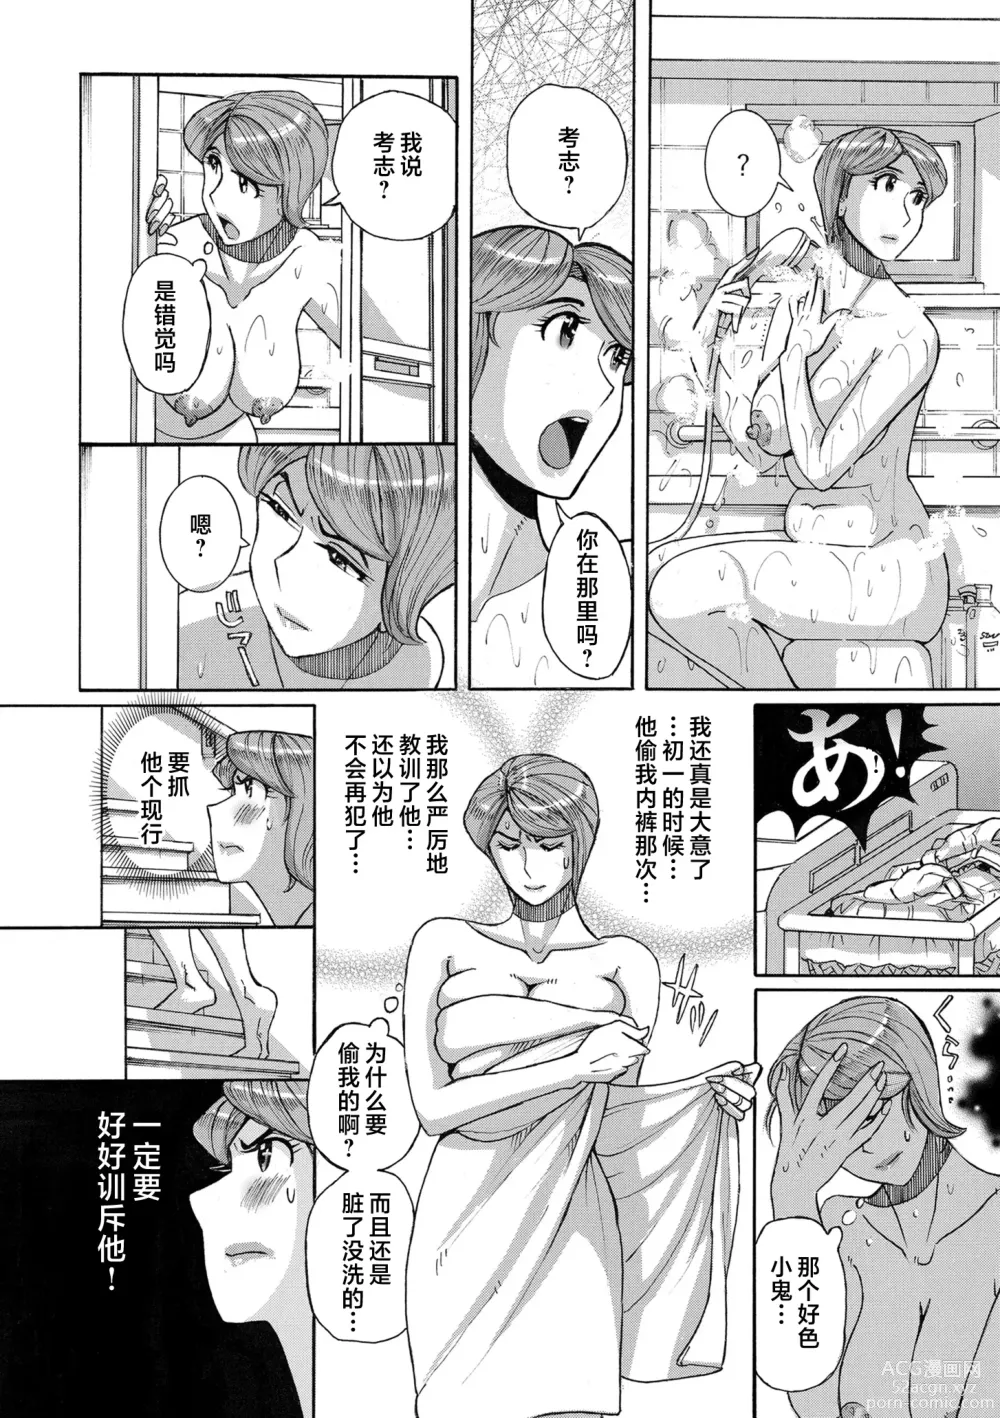 Page 10 of manga Mother’s Care Service How to ’Wincest’